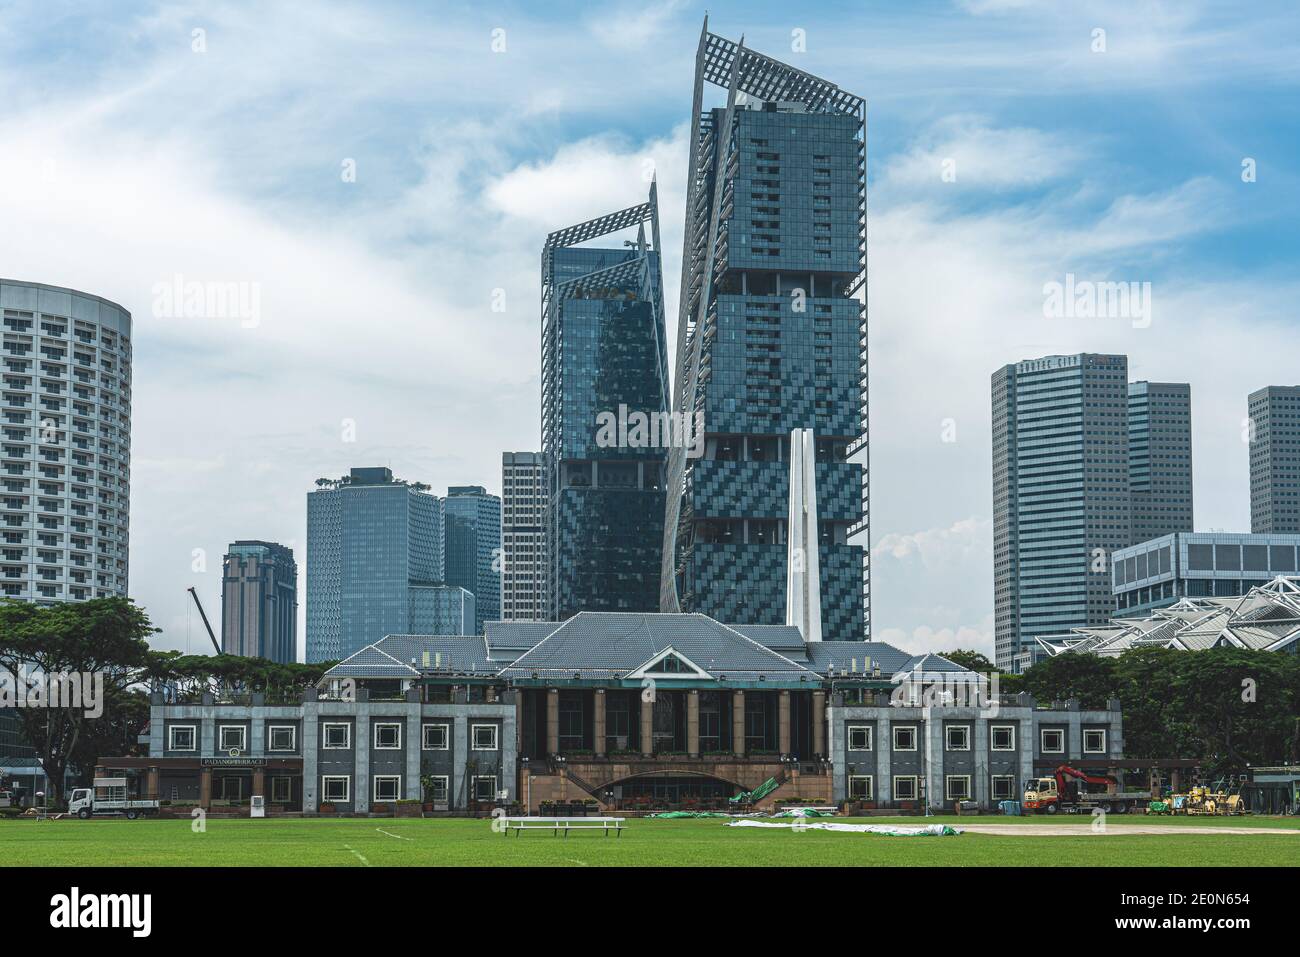 Padang  / Singapore - May 21 2018: Singapore Recreation Club building with Grass infront and skyscrapers in the back Stock Photo